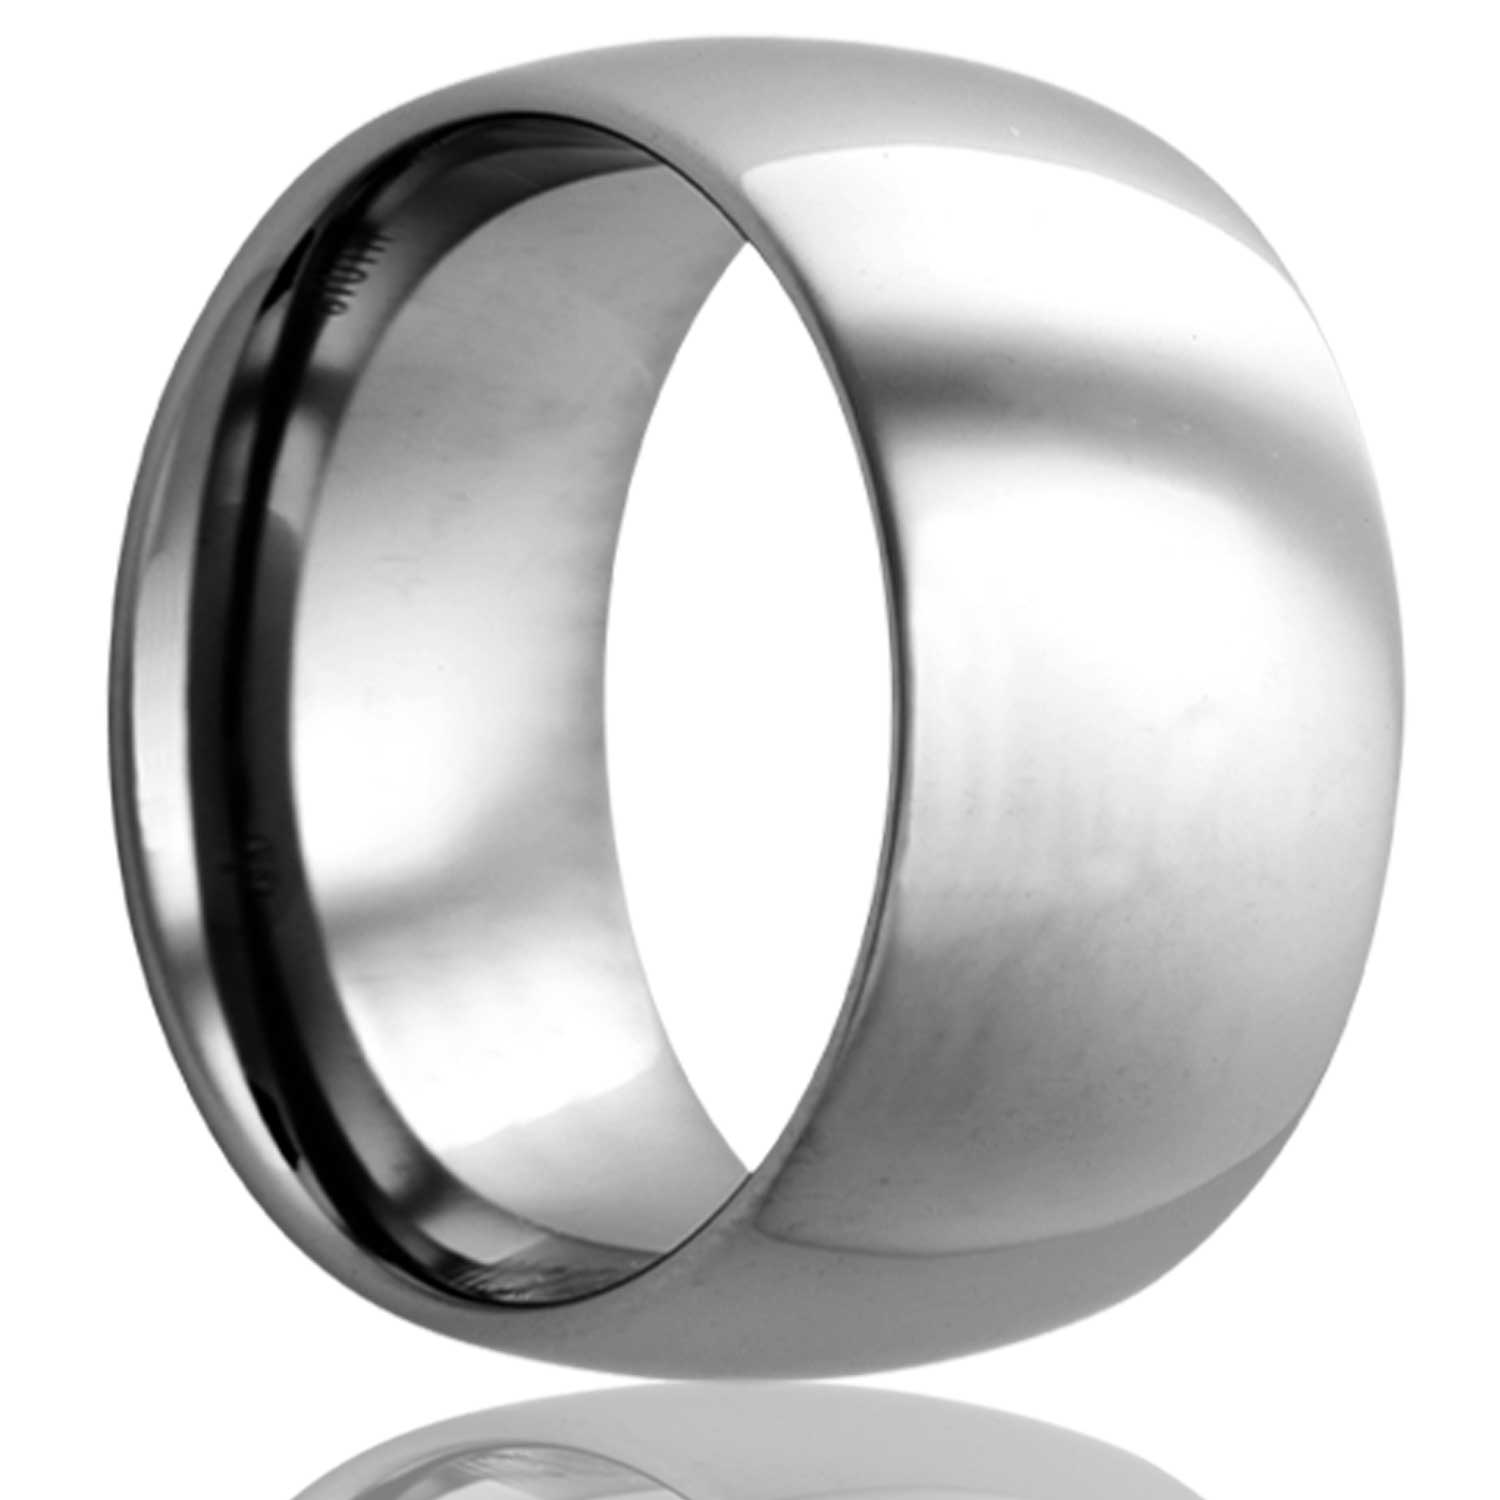 A domed tantalum wedding band displayed on a neutral white background.